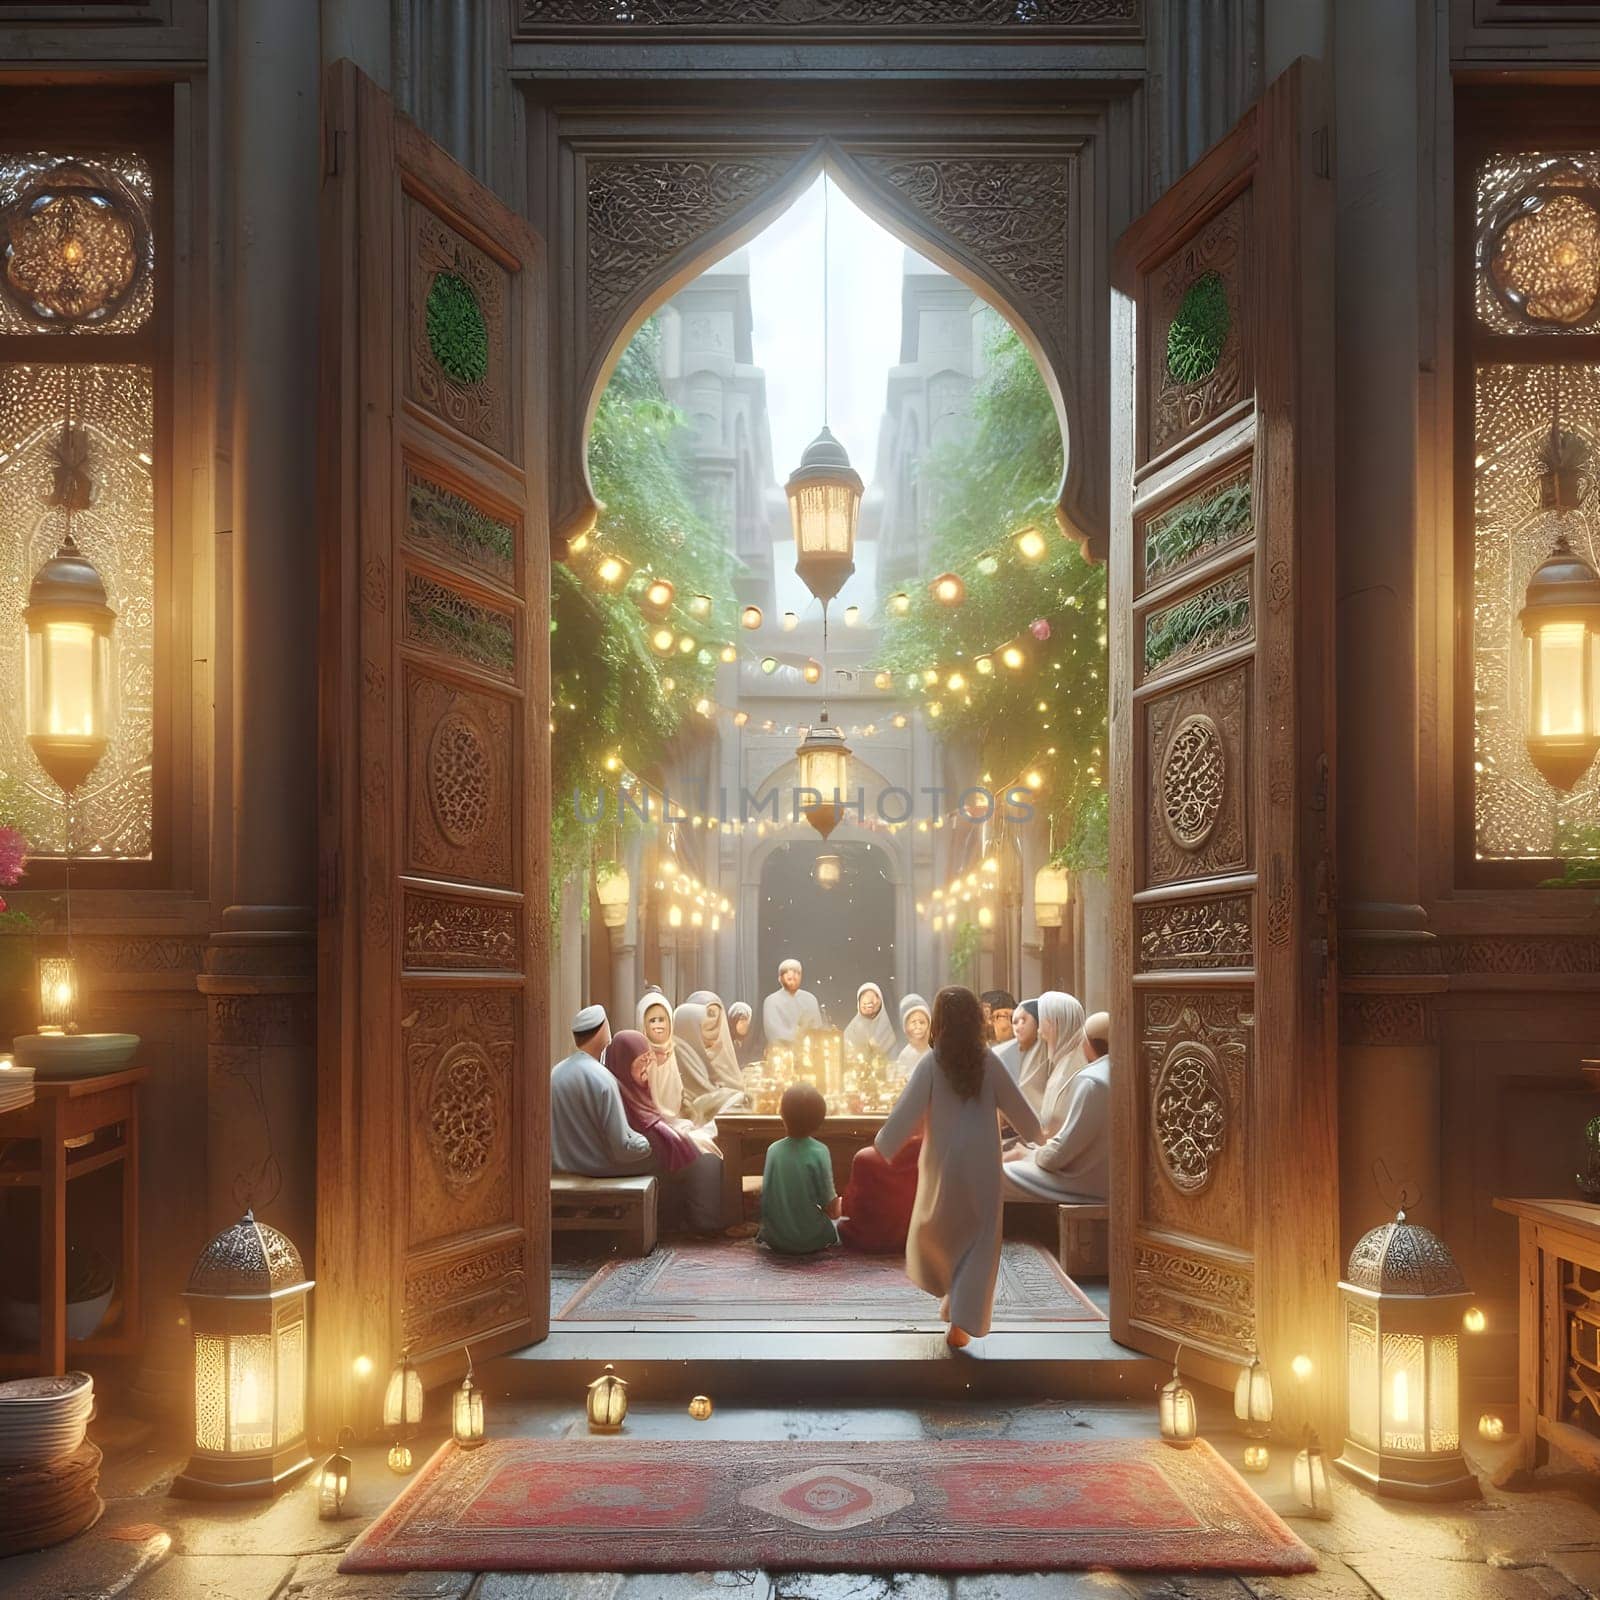 An old, weathered door opens to a courtyard adorned with Ramadan lanterns, as a family welcomes guests for Iftar 4k, photorealistic by Designlab